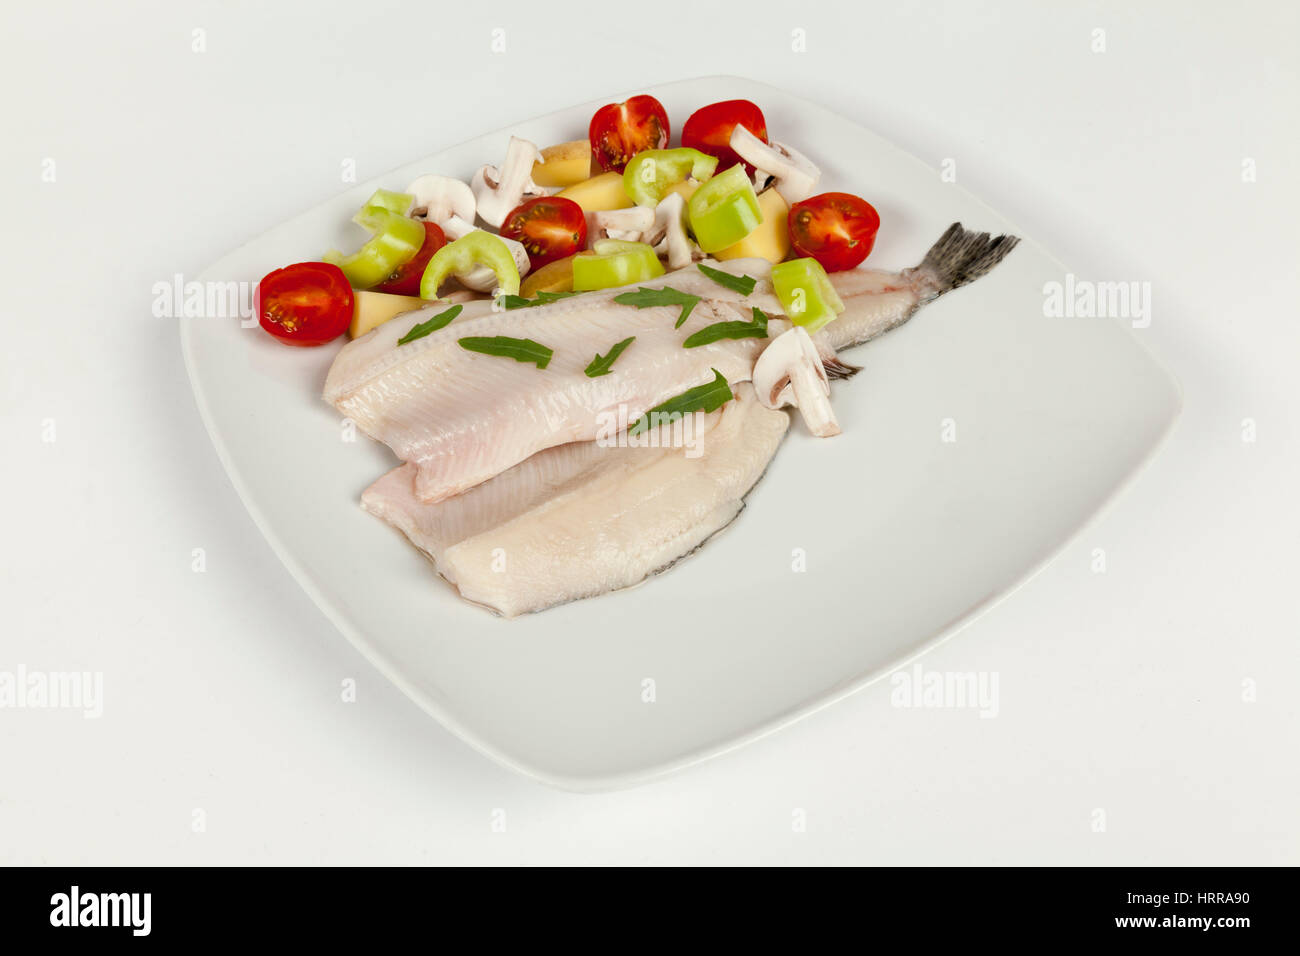 cleaned trout fillet on a white plate and fresh vegetables Stock Photo